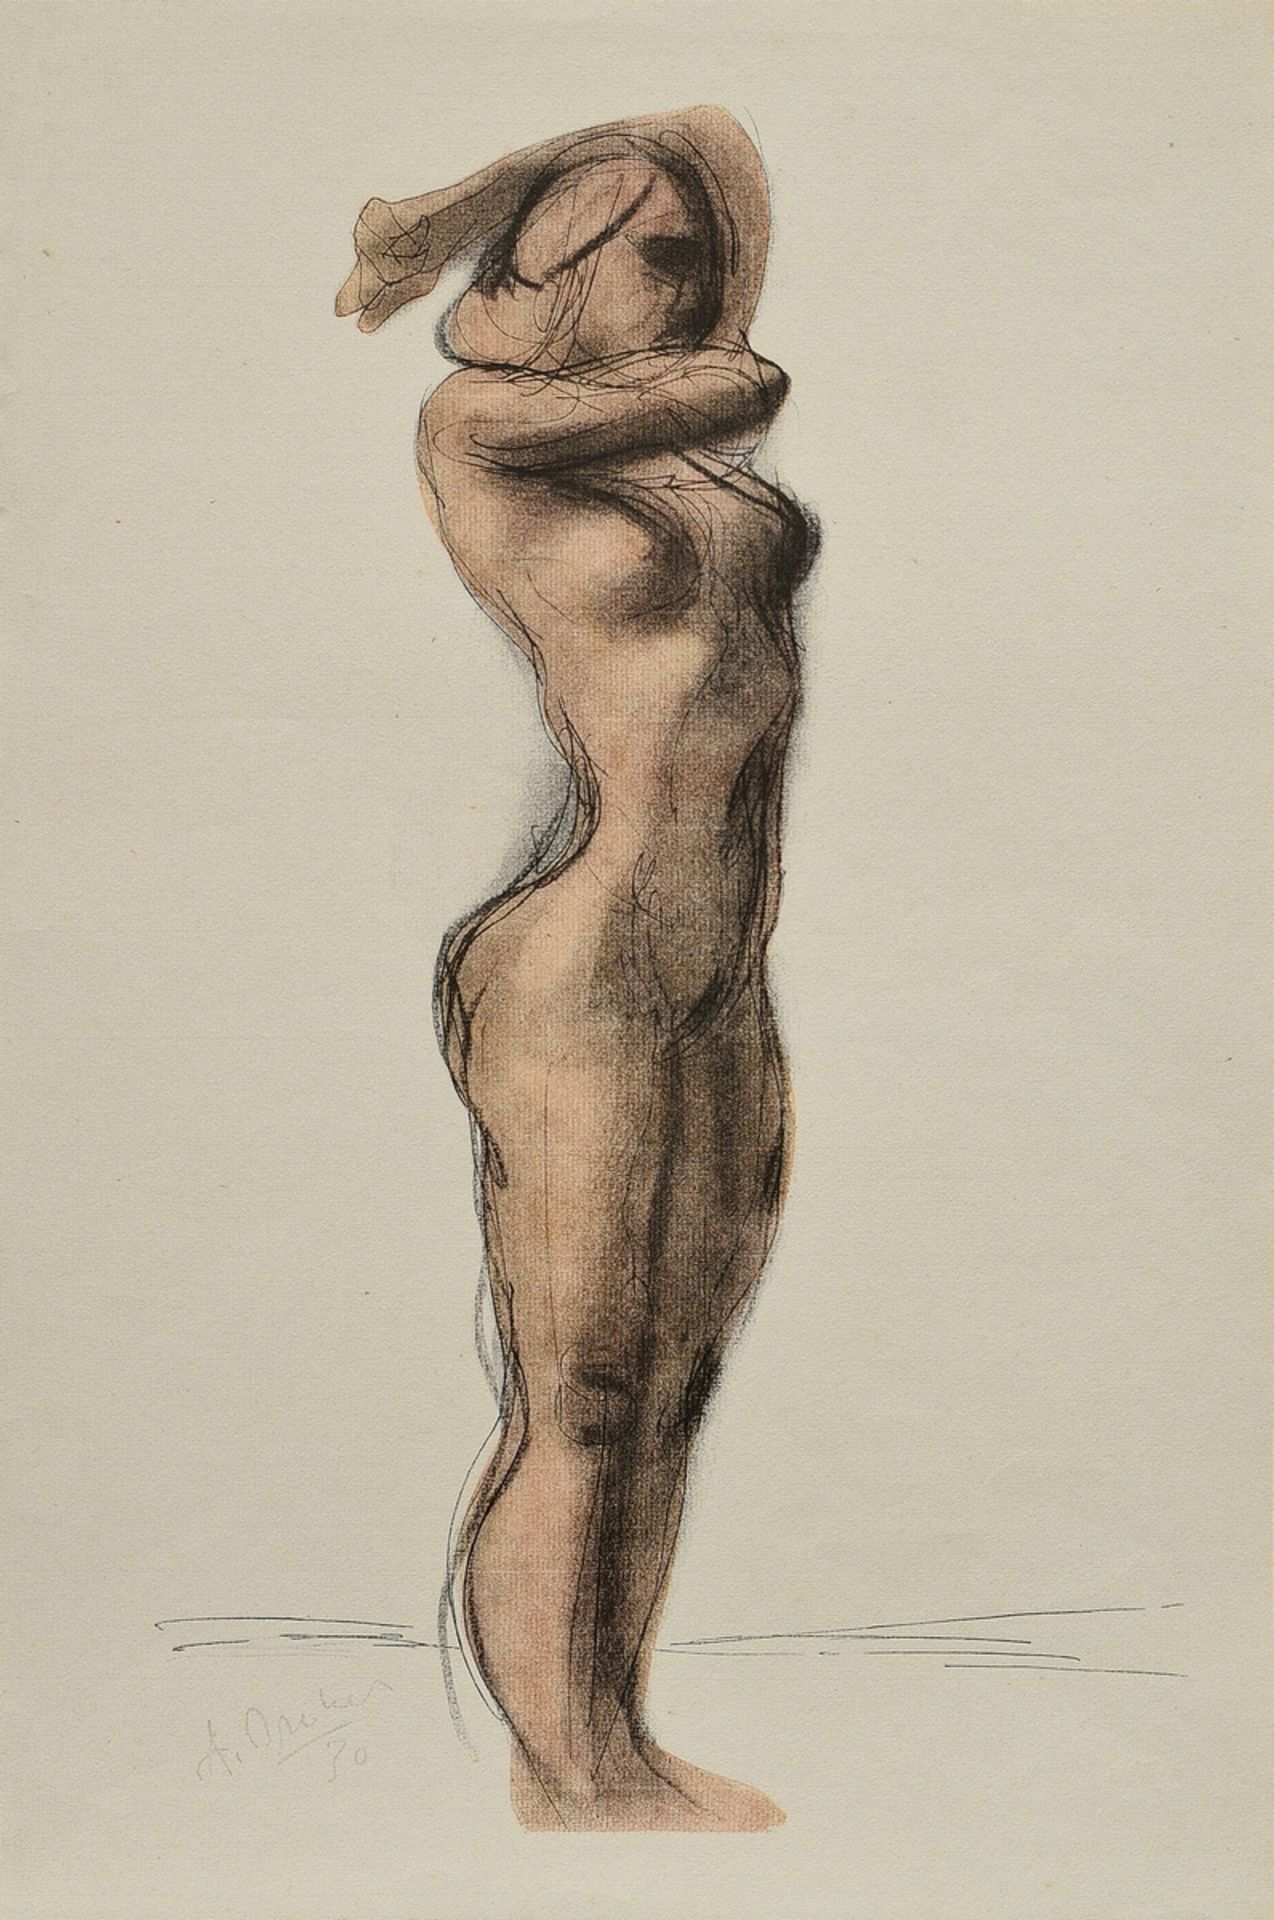 2 Breker, Arno (1900-1991) "Standing Woman" and "Kneeling Woman" 1929/30, lithographs, b. print sig - Image 2 of 5